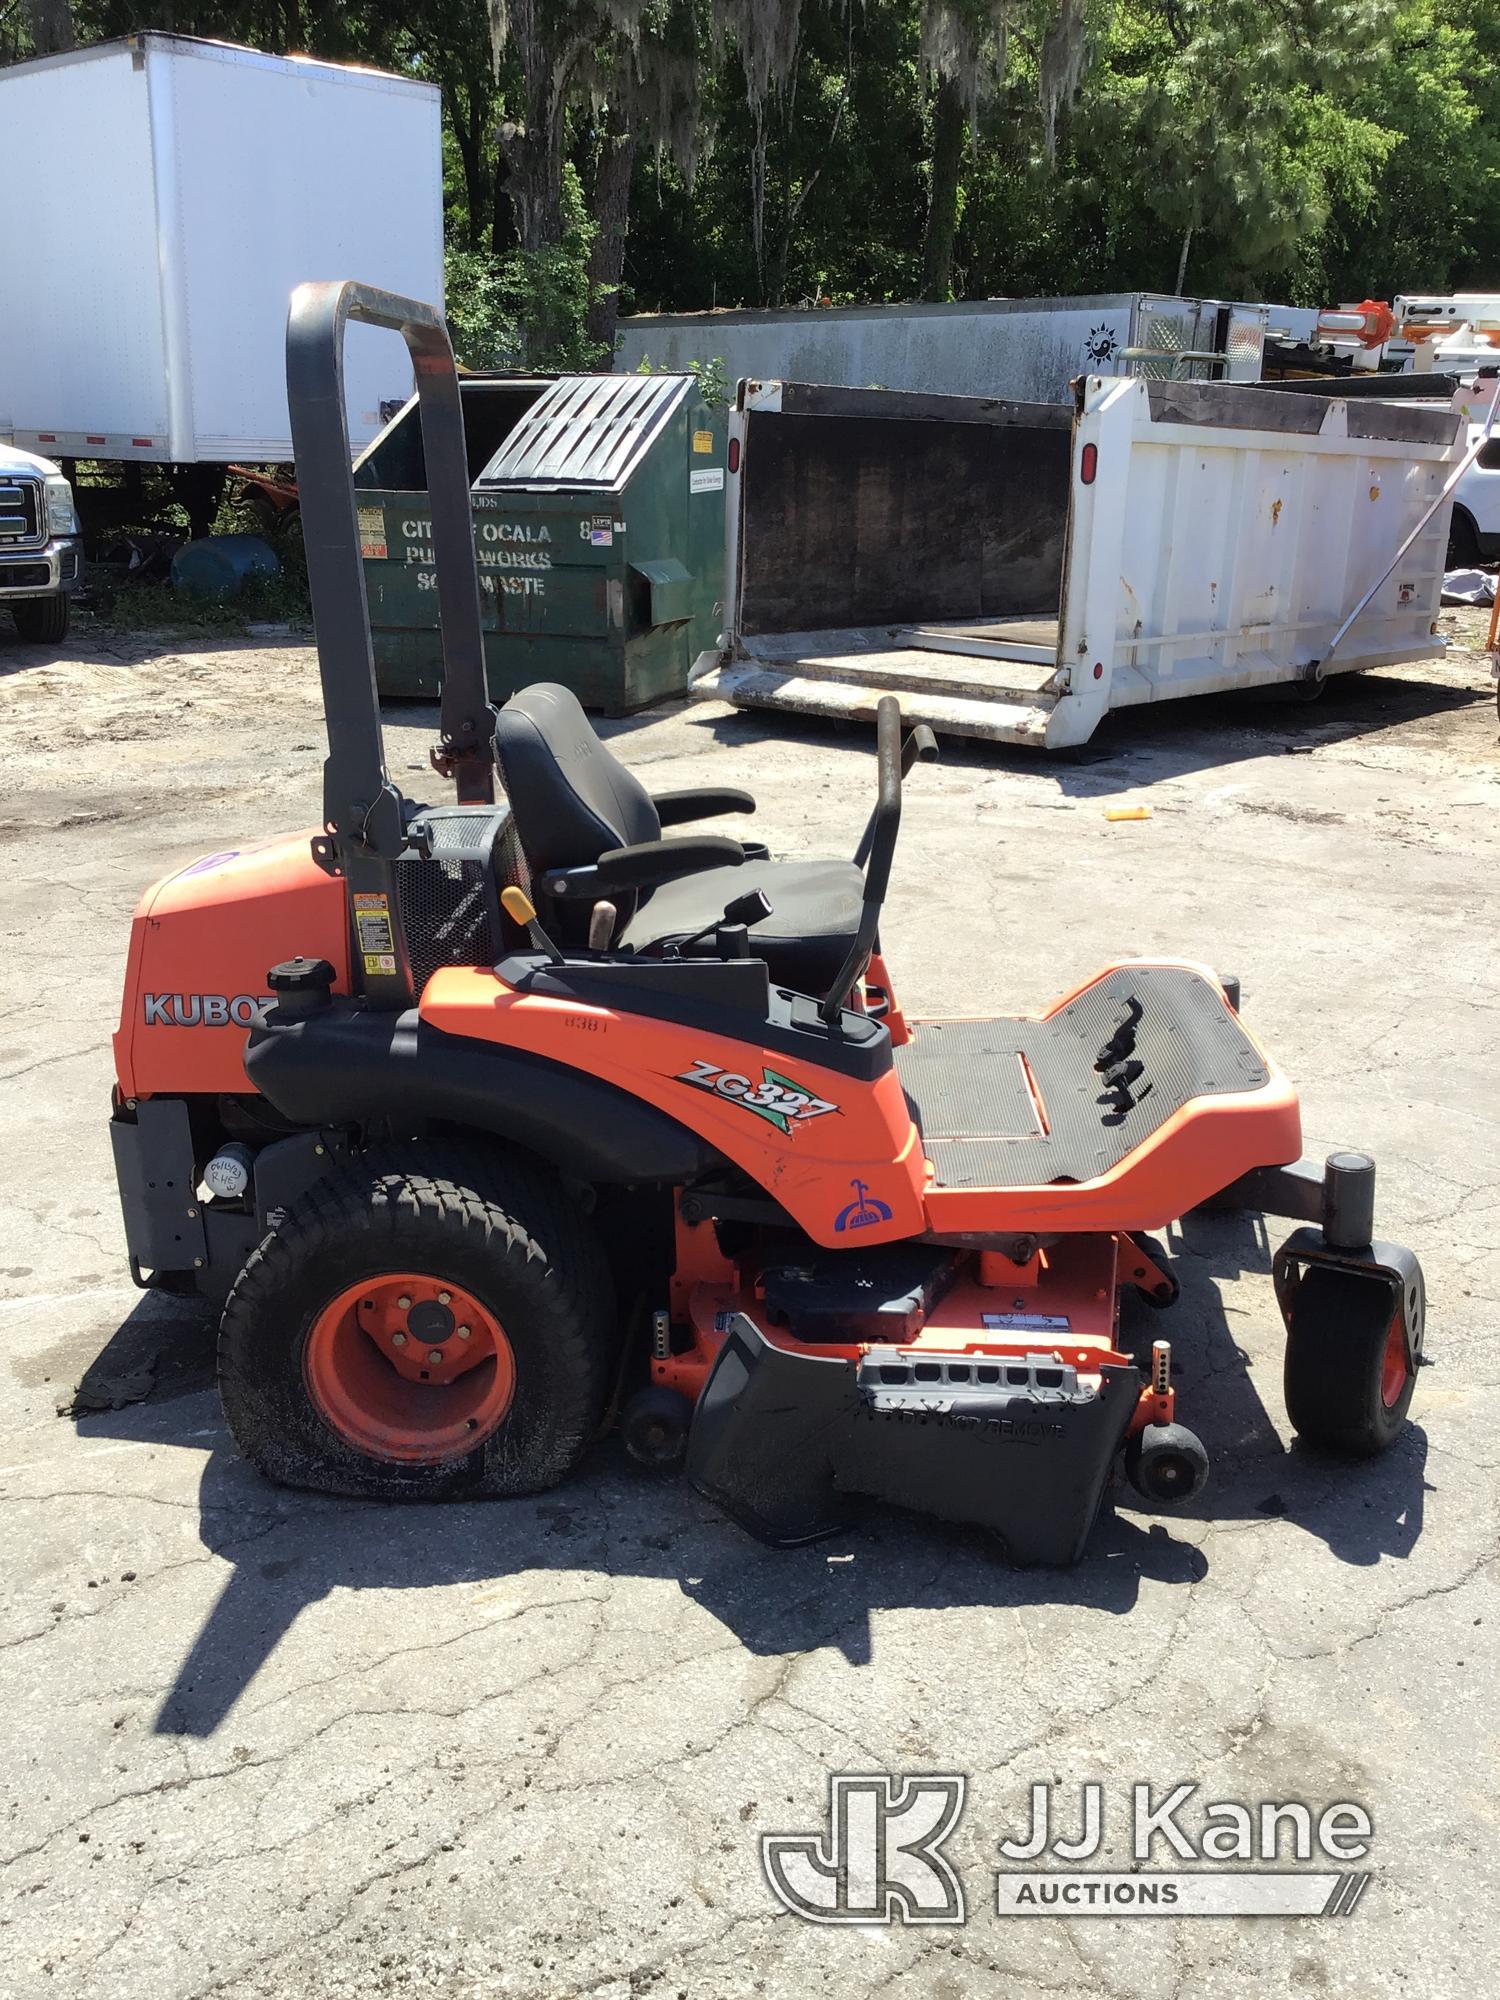 (Ocala, FL) 2009 Kubota ZG327 Lawn Mower Turns Over Does Not Run. Condition Unknown. (Flat Tires, 60